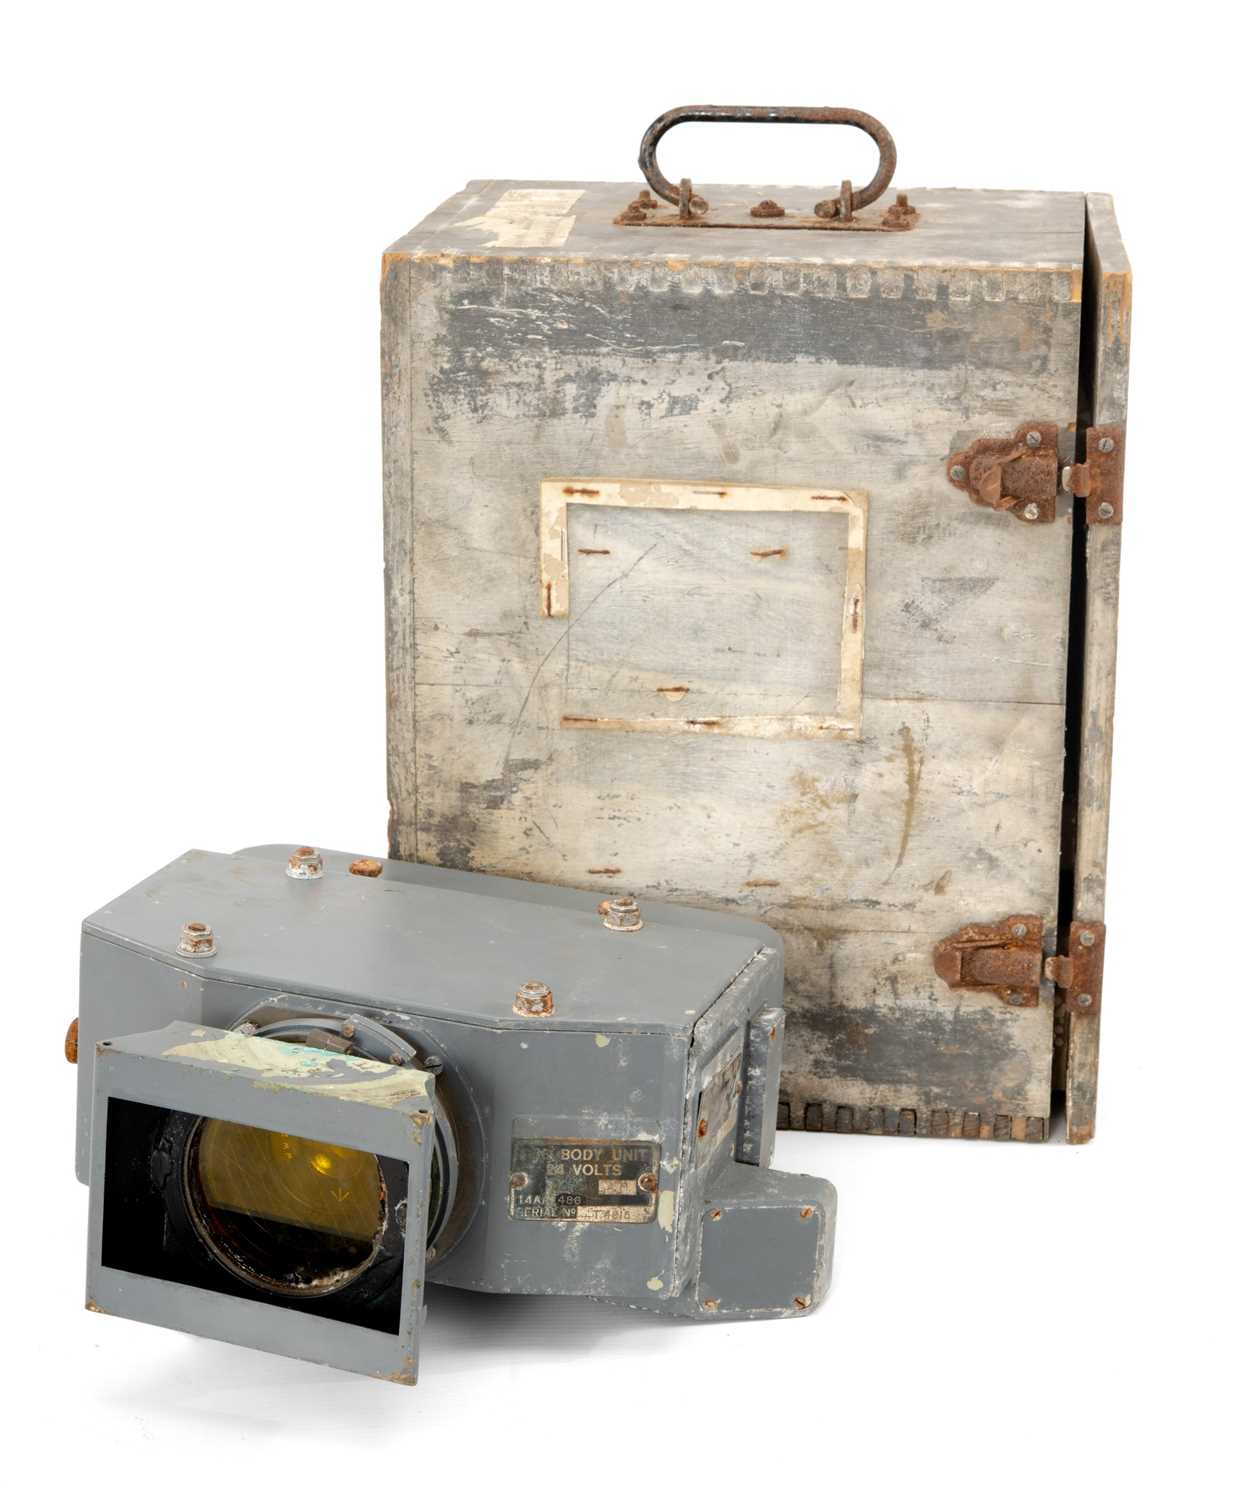 THE MILITARY CLUB HOUSE: F.46 TORPEDO TRAINING CAMERA, lens marked 'ww27190' with military arrow and